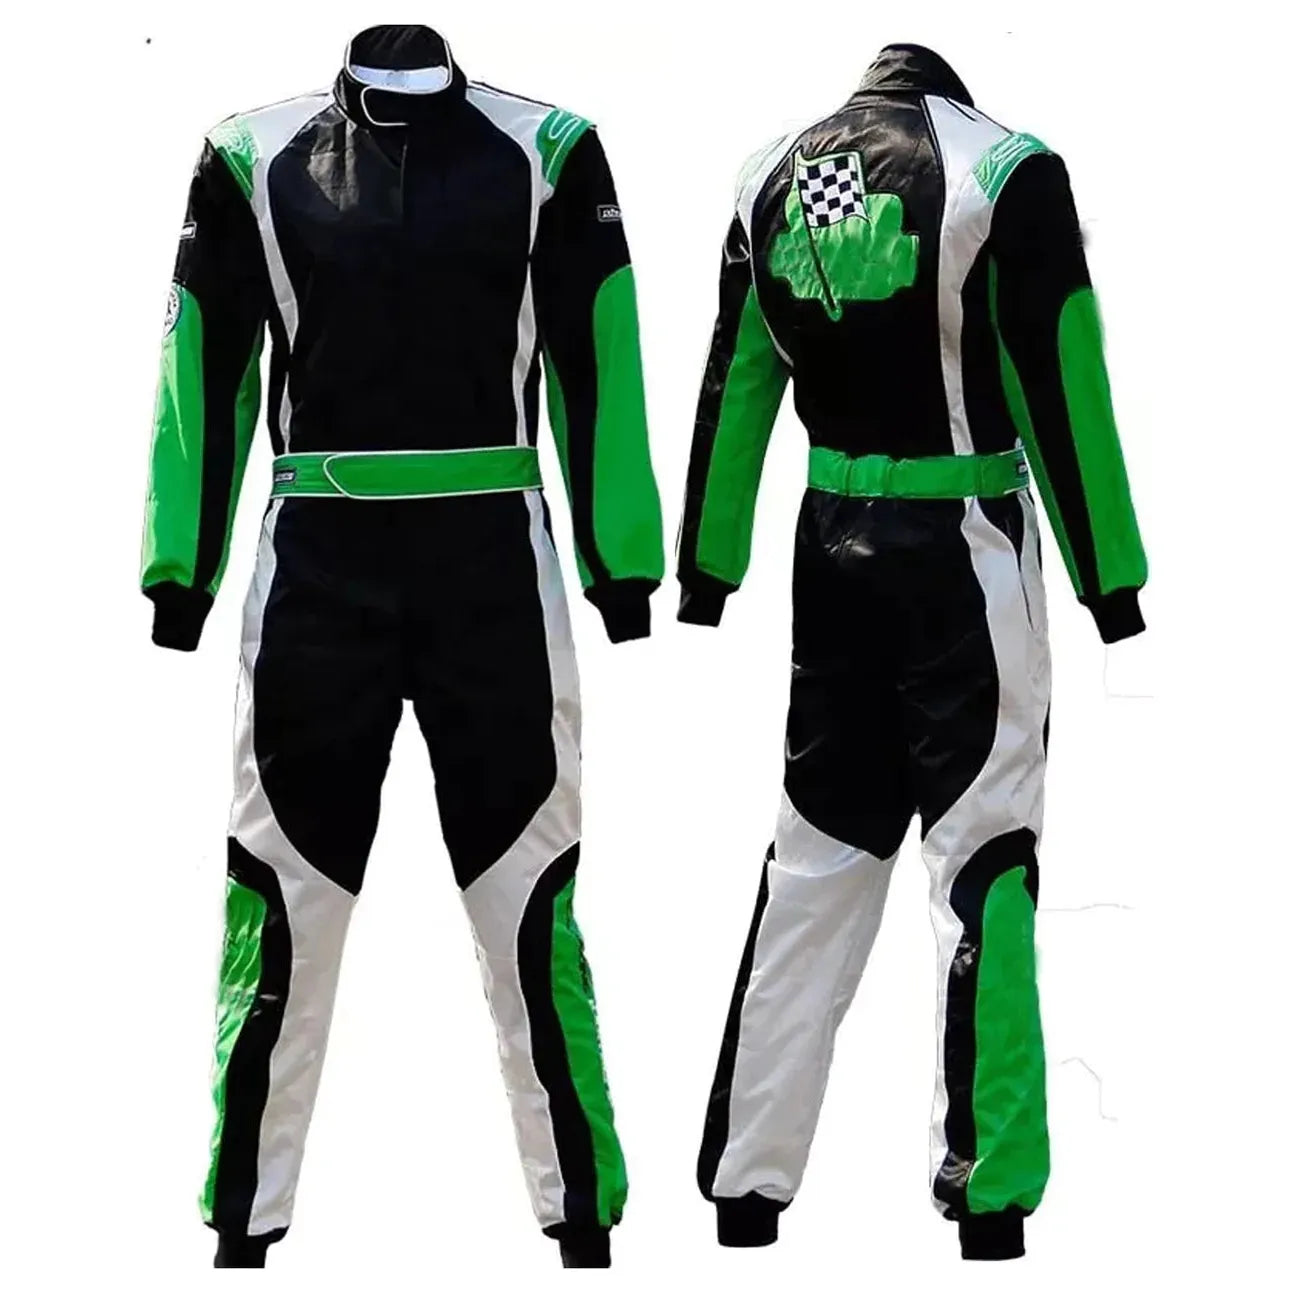 Go kart racing Sublimation Protective clothing Racing gear Suit N-048